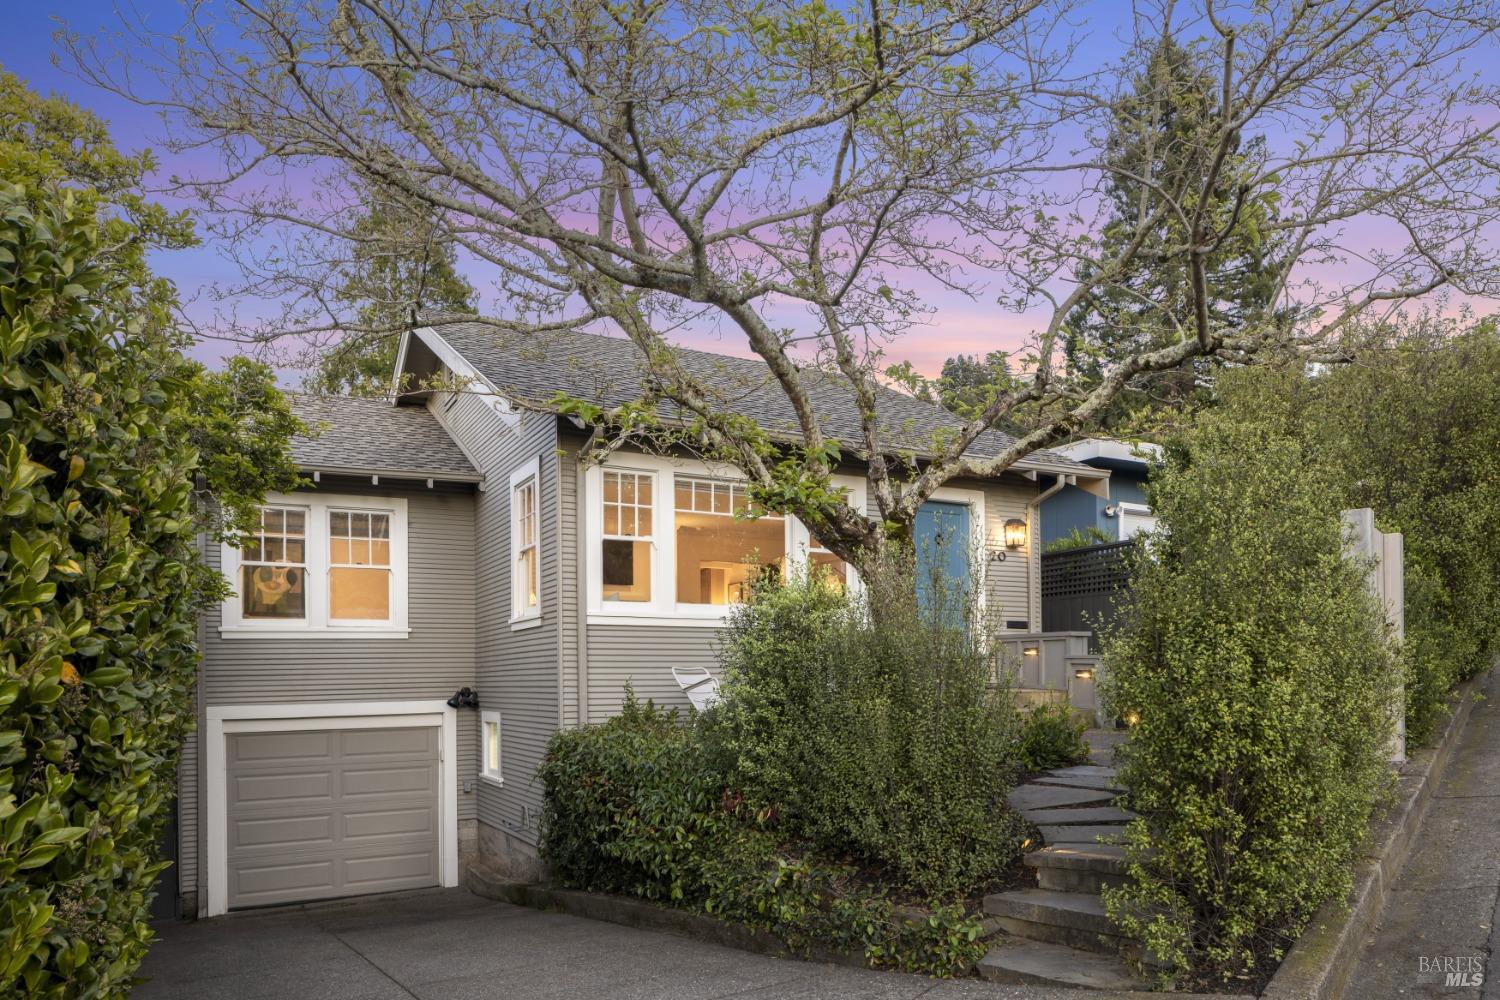 Located in the highly desirable Chapman Park neighborhood of Corte Madera, this endearing turnkey special home features 3BR+/2BA and is ideal for the active indoor/outdoor California lifestyle. Upon entering the front gate, a stone pathway leads to the front entry Dutch door as it welcomes you into this sun-filled vintage charmed home with modernized amenities that has been meticulously maintained. The renovated chef's kitchen is properly equipped with stainless steel appliances, including Wolf gas range, stone counters and offers convenient direct access to the deck and outdoor gardens. The sunny tranquil private gardens serve as an extension of the home, offering multiple enjoyable areas for relaxation and comfortable at-home living. Gather around the gas fire pit while hosting family and friends, and appreciate the surrounding manicured landscaped gardens, enhanced by elegant outdoor lighting and beautiful bluestone patios. In addition, the versatile bonus room with full bathroom located off the garden is perfect for home office, gym or visiting guests. Expansive storage room, laundry and 1-car garage plus driveway parking, complete this home. Top public schools, prime commute location, close proximity to shopping, parks and world-class hiking/biking. Move right in and enjoy!